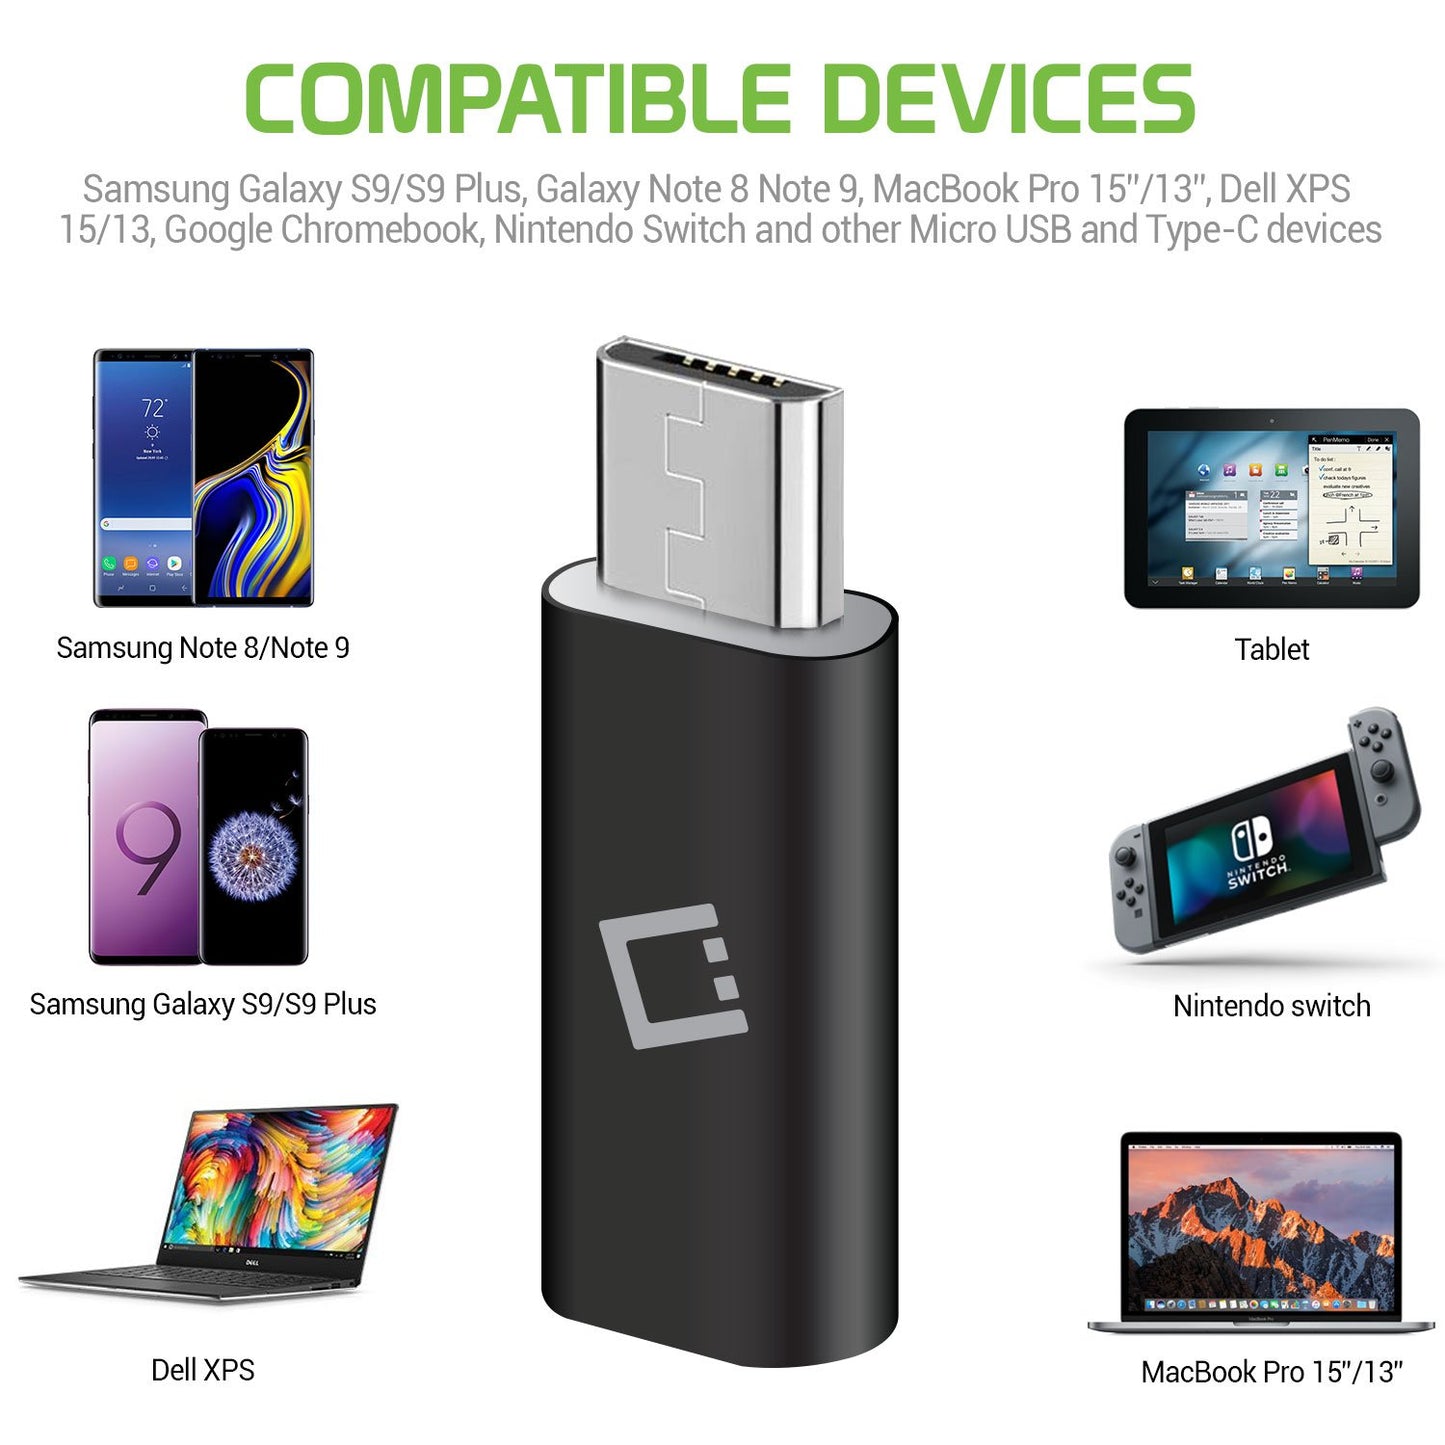 CNCTOMIC - Micro USB to USB-C Adapter Connector by Cellet – Black